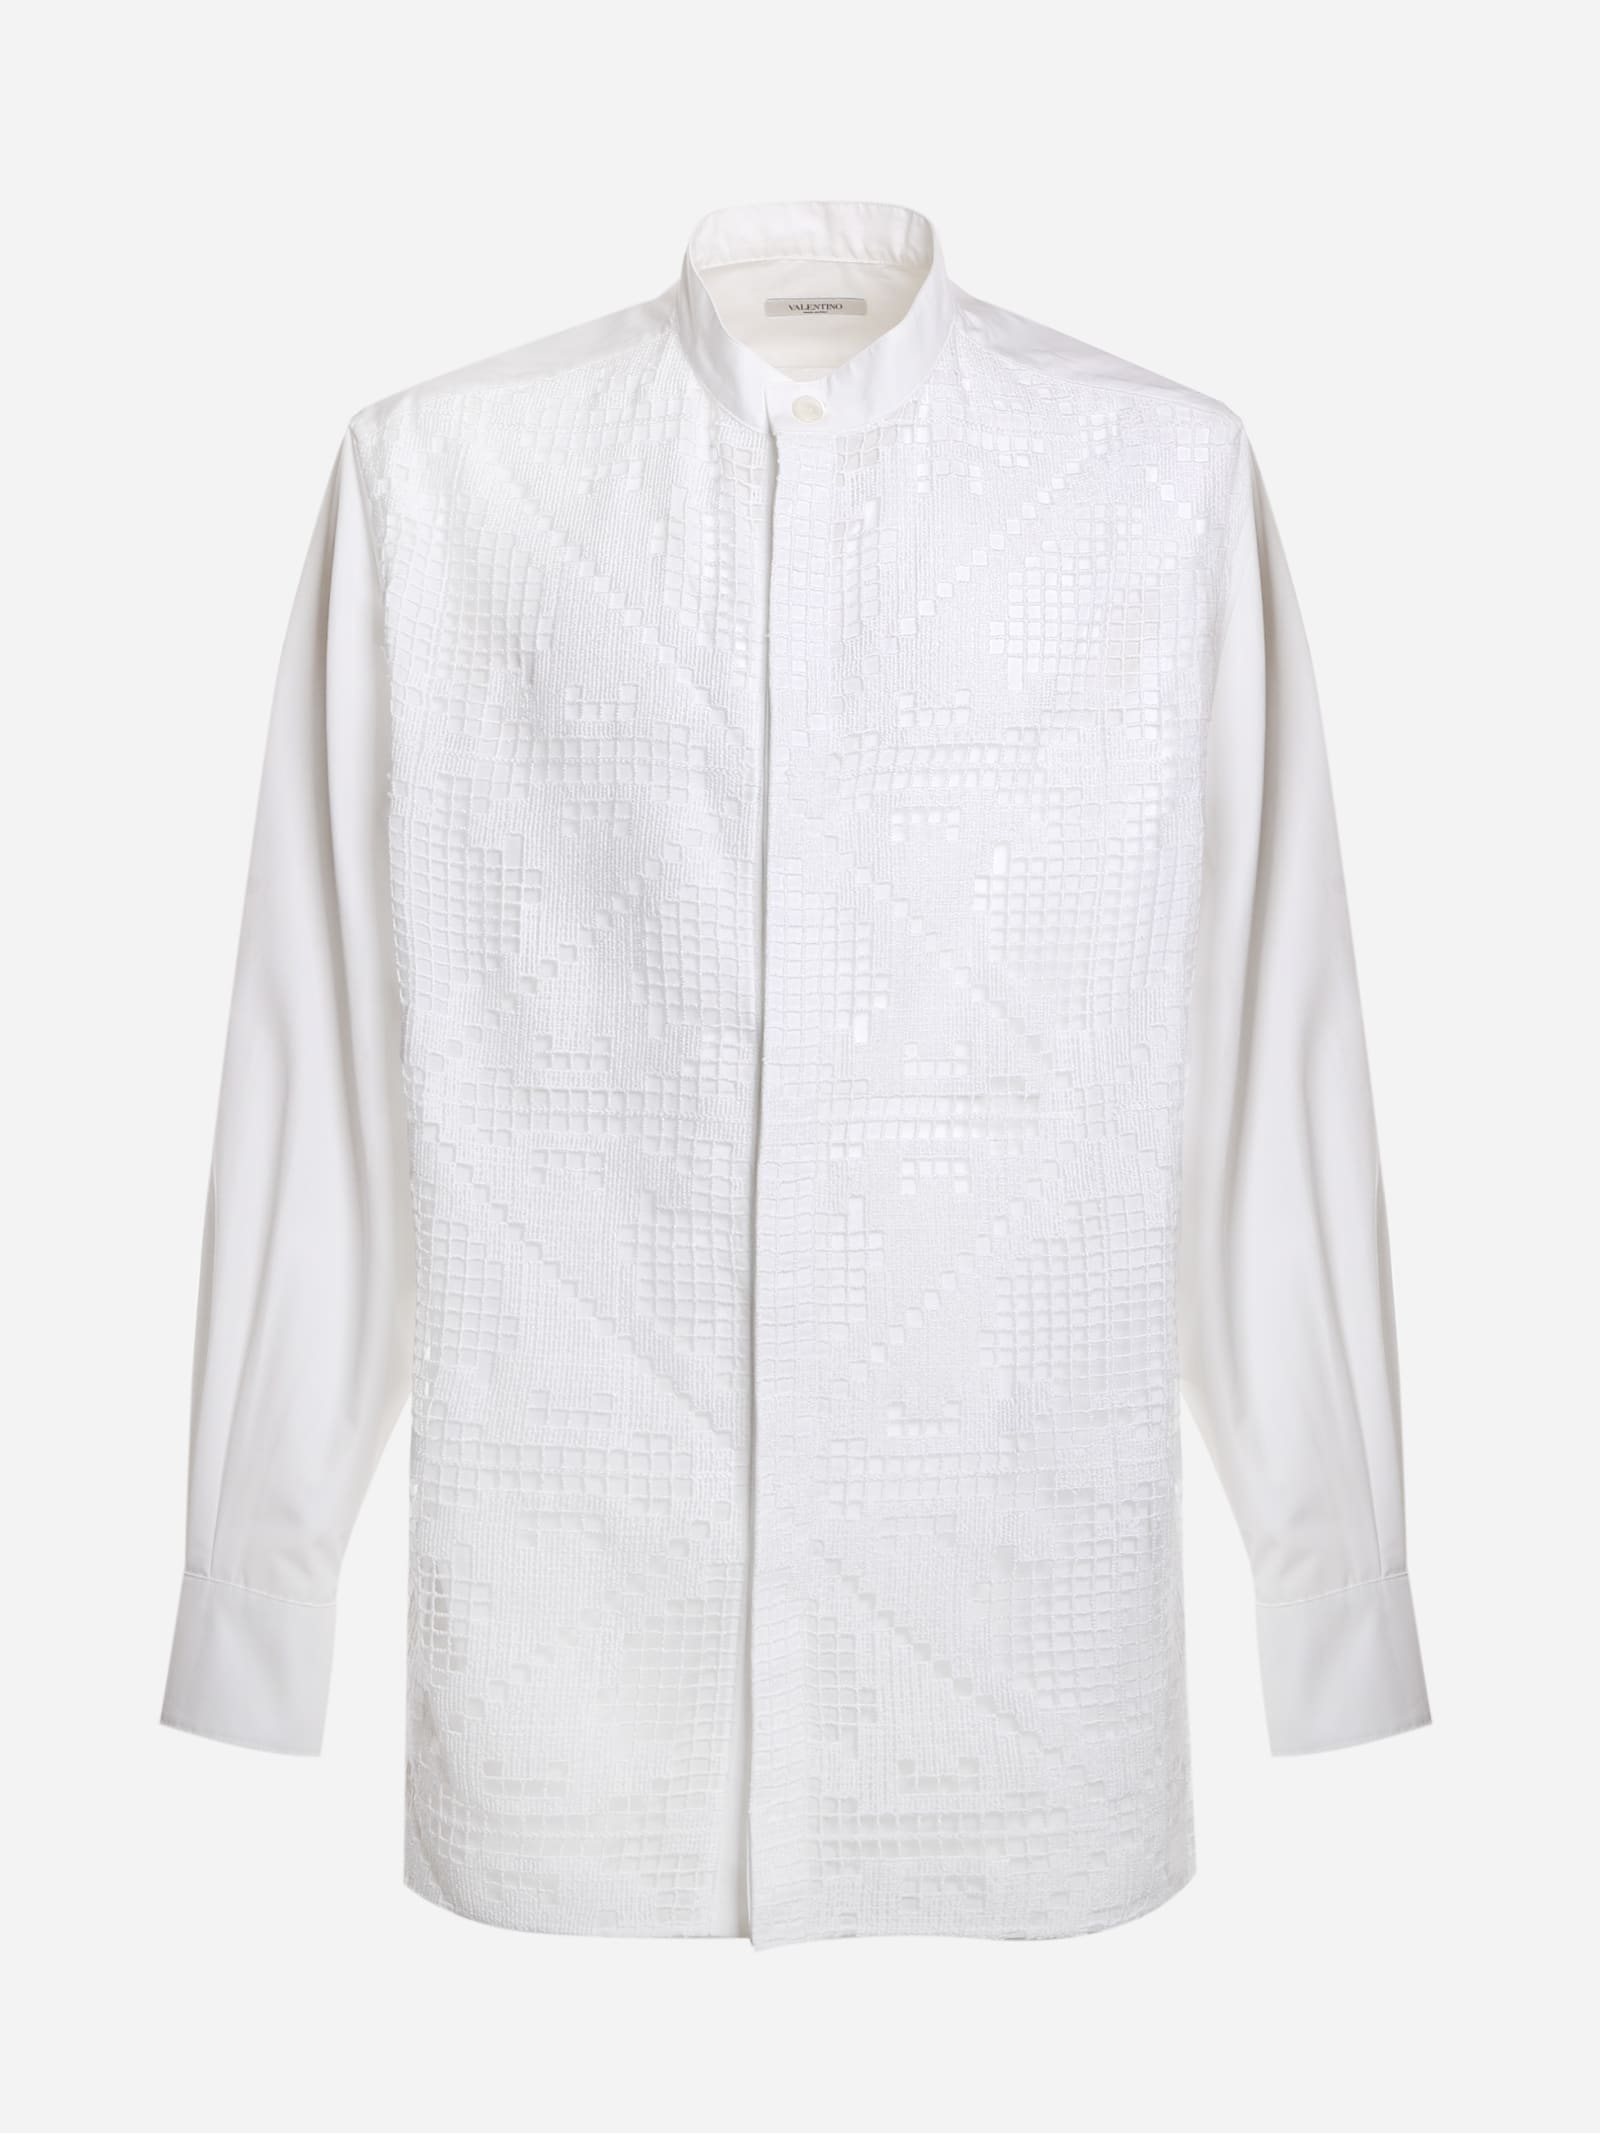 Valentino Cotton Shirt With Perforated Lace Inserts In White